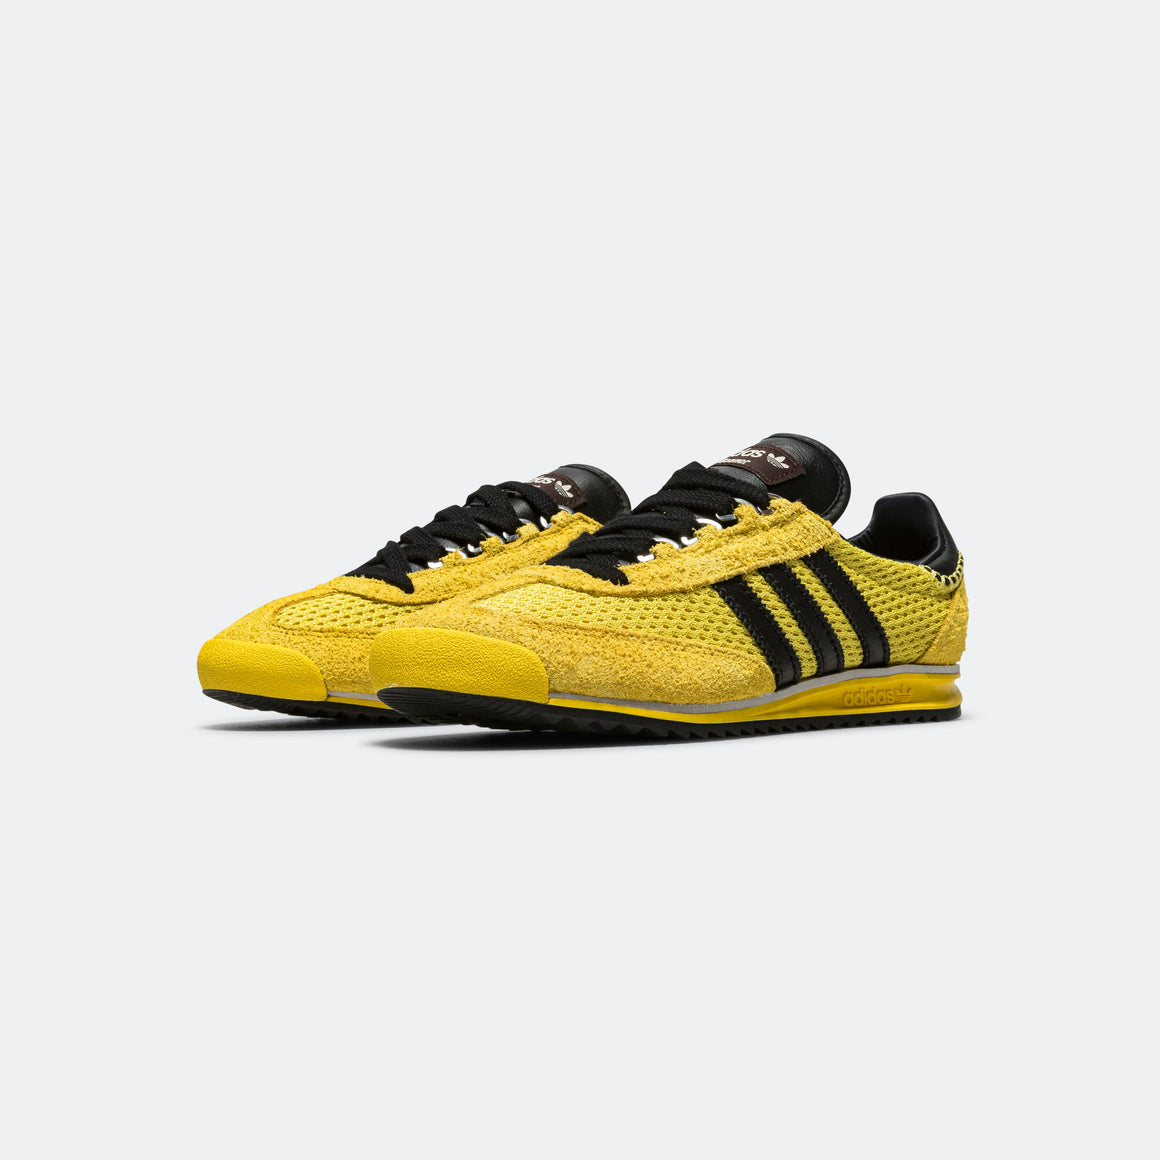 adidas - SL76 x Wales Bonner - Yellow/Core Black - UP THERE